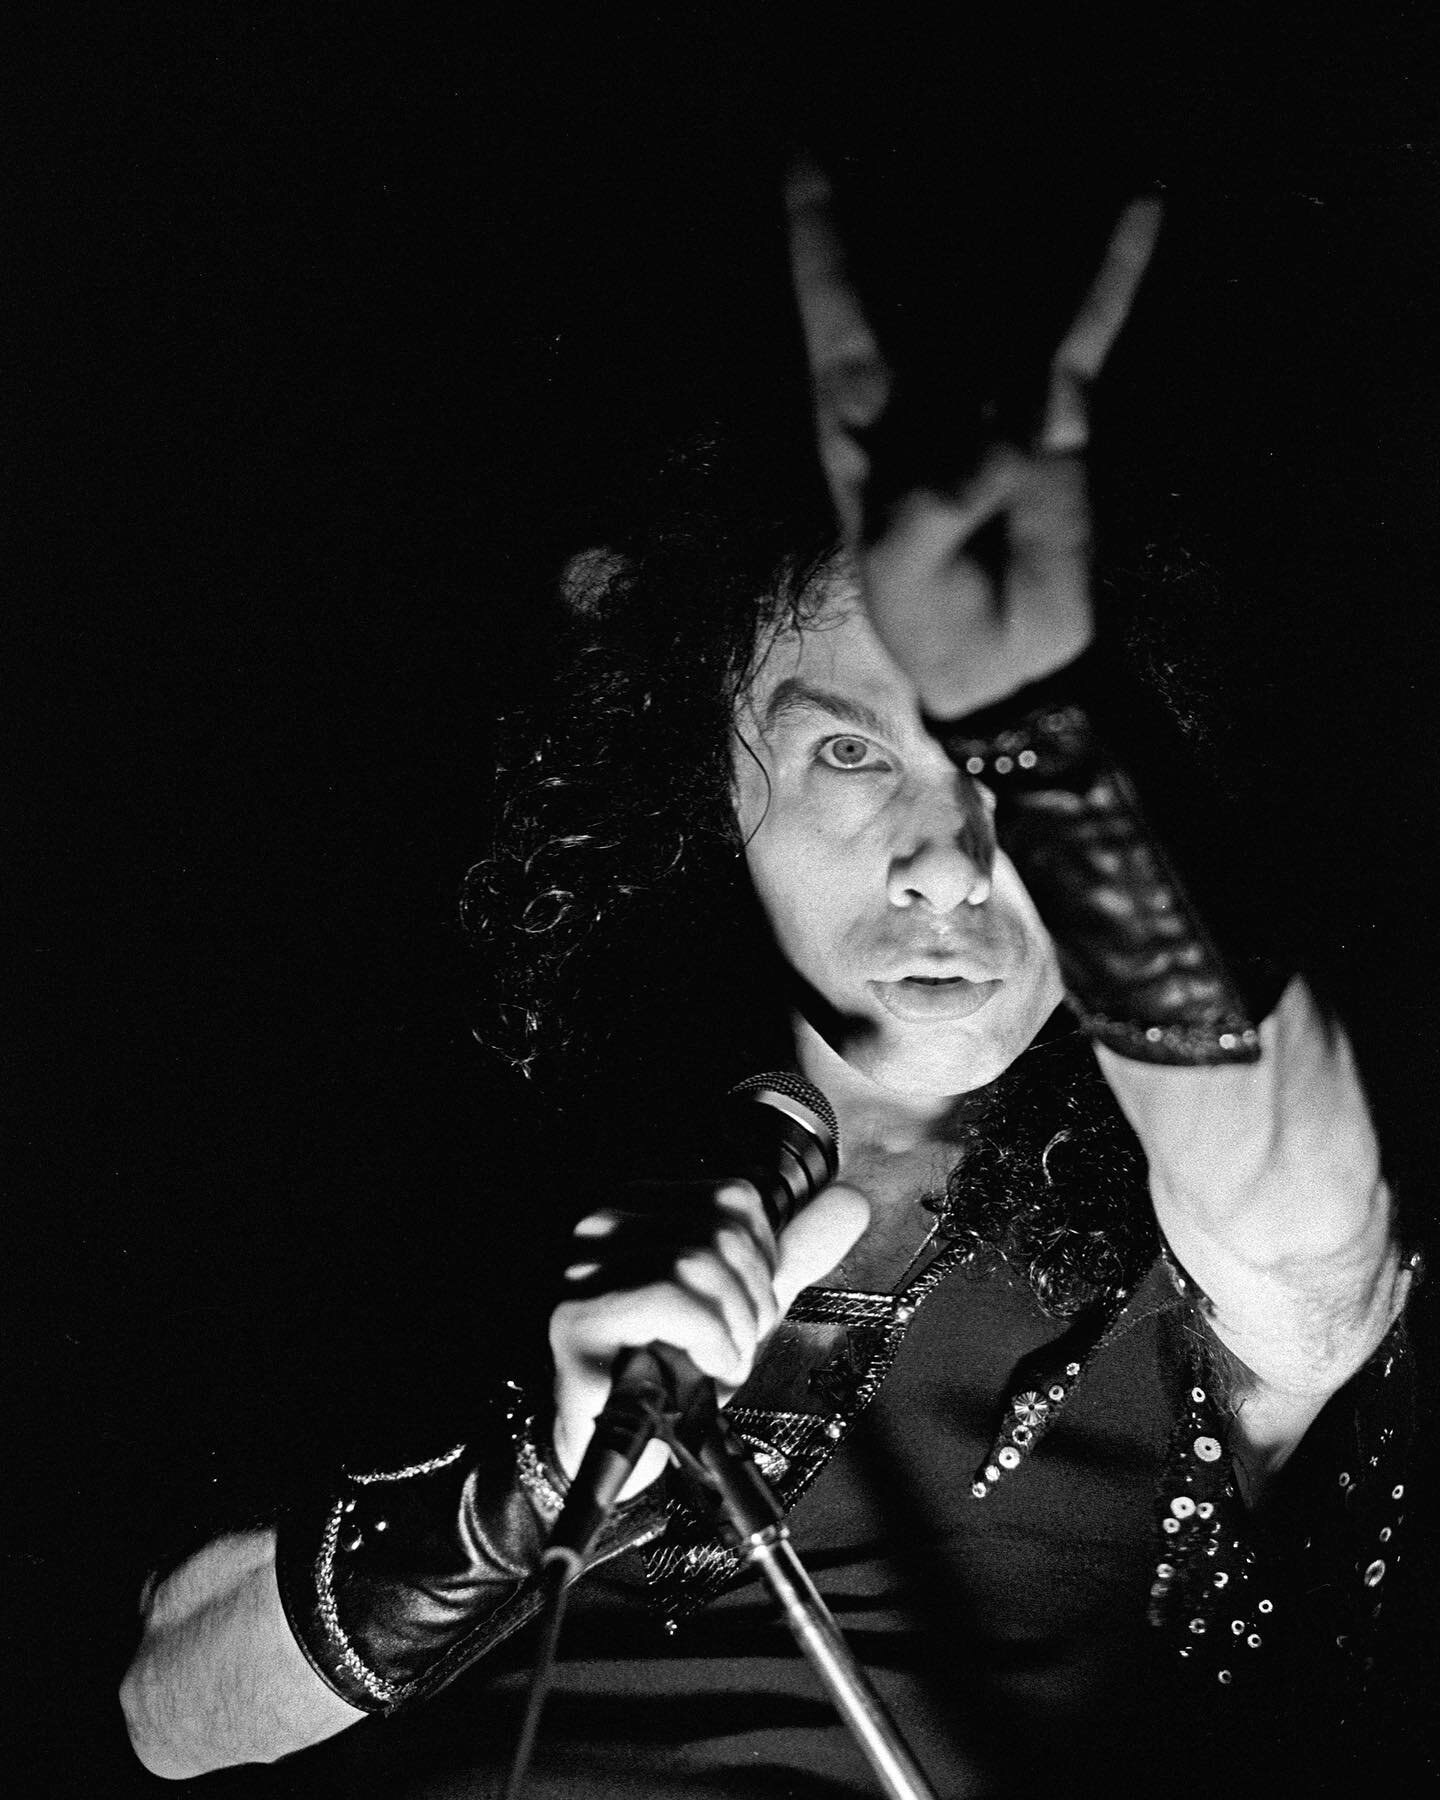 &ldquo;There's perfect harmony
In the rising and the falling of the sea
And as we sail along
I never fail to be astounded by
The things we'll do for promises
And a song.&rdquo;

Thank you @_ronniejamesdio 🤘